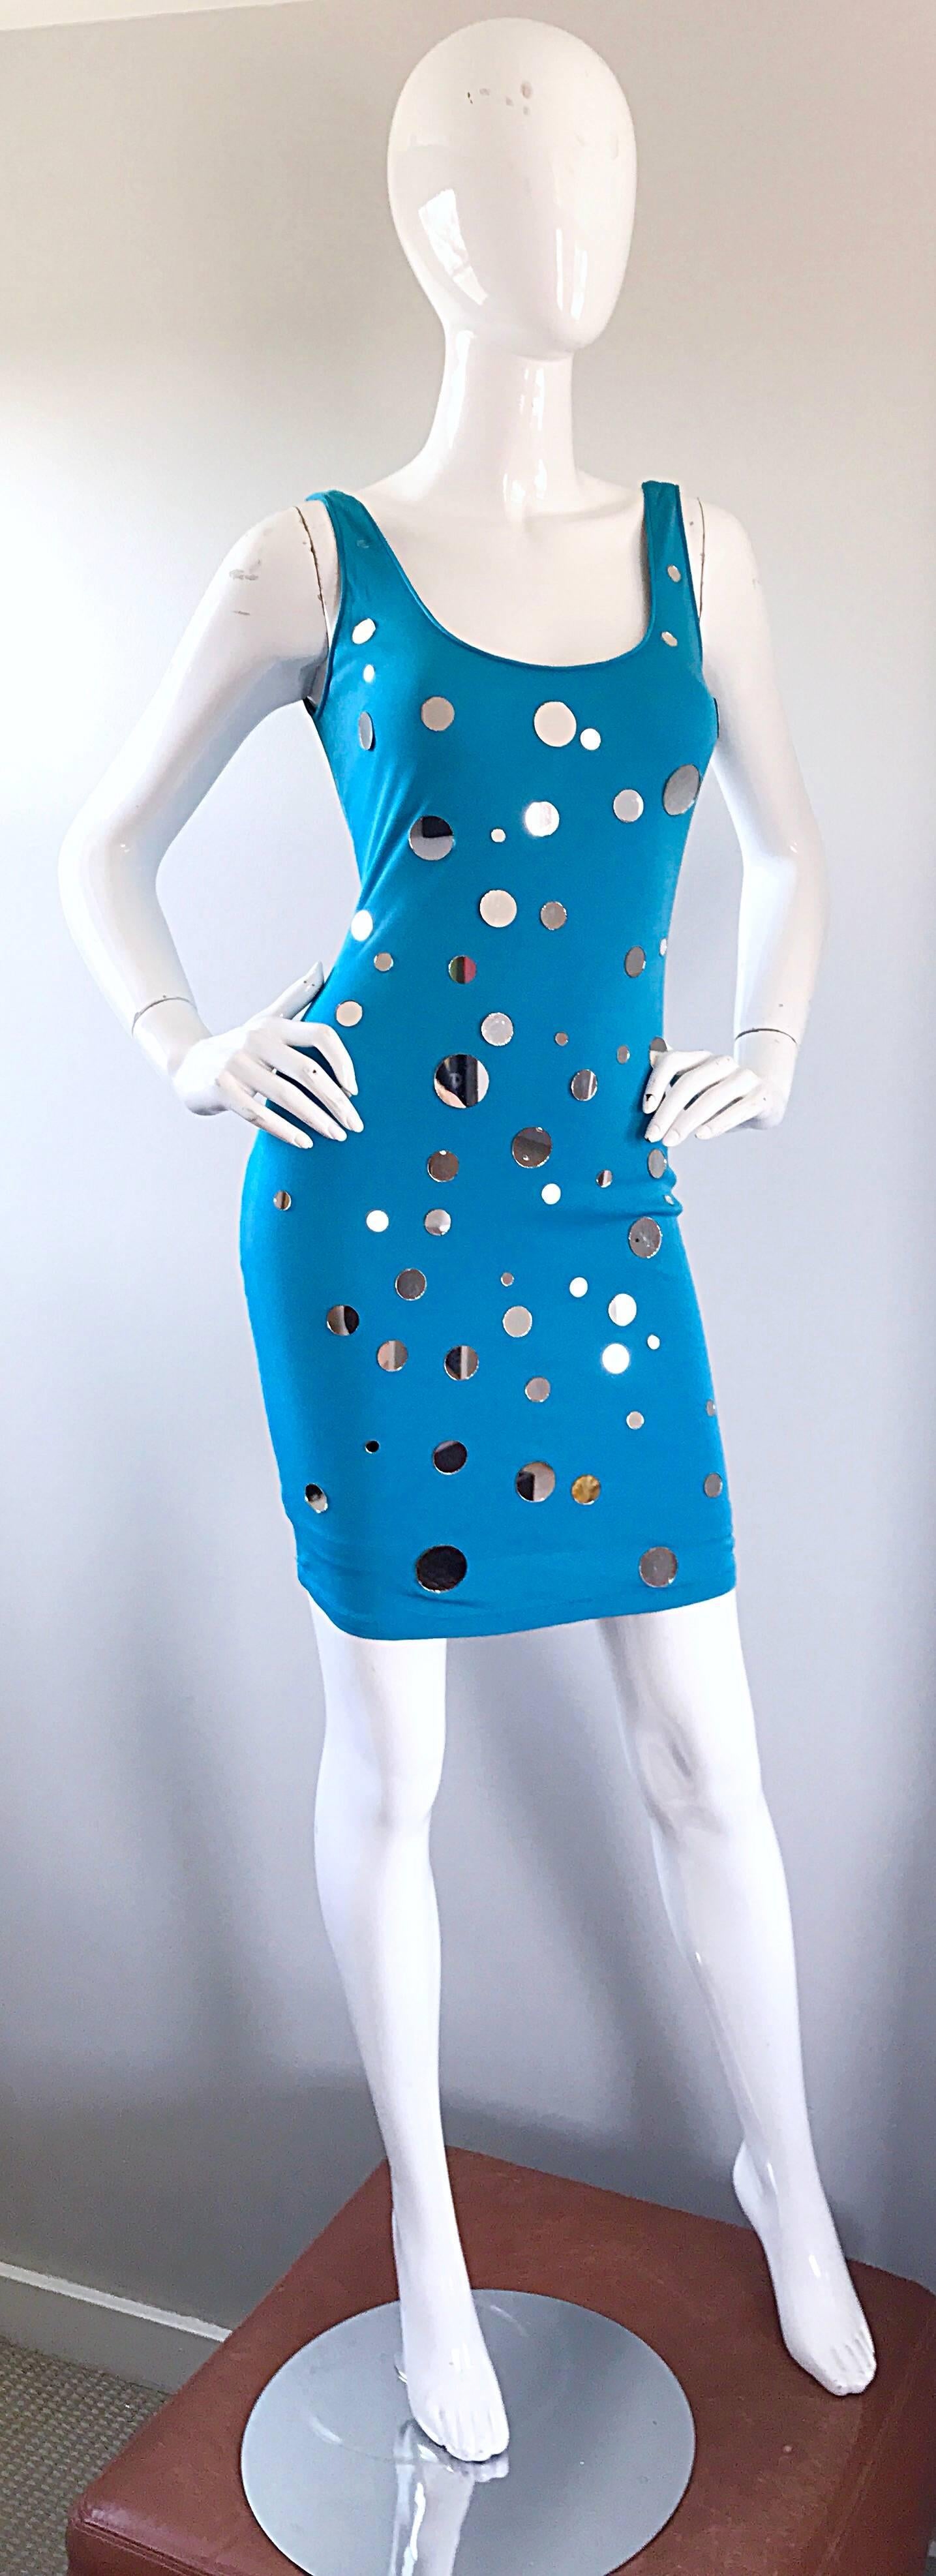 Documented C.D. Greene Turquoise Teal Blue Vintage Mirrored Bodycon Beaded Dress 2